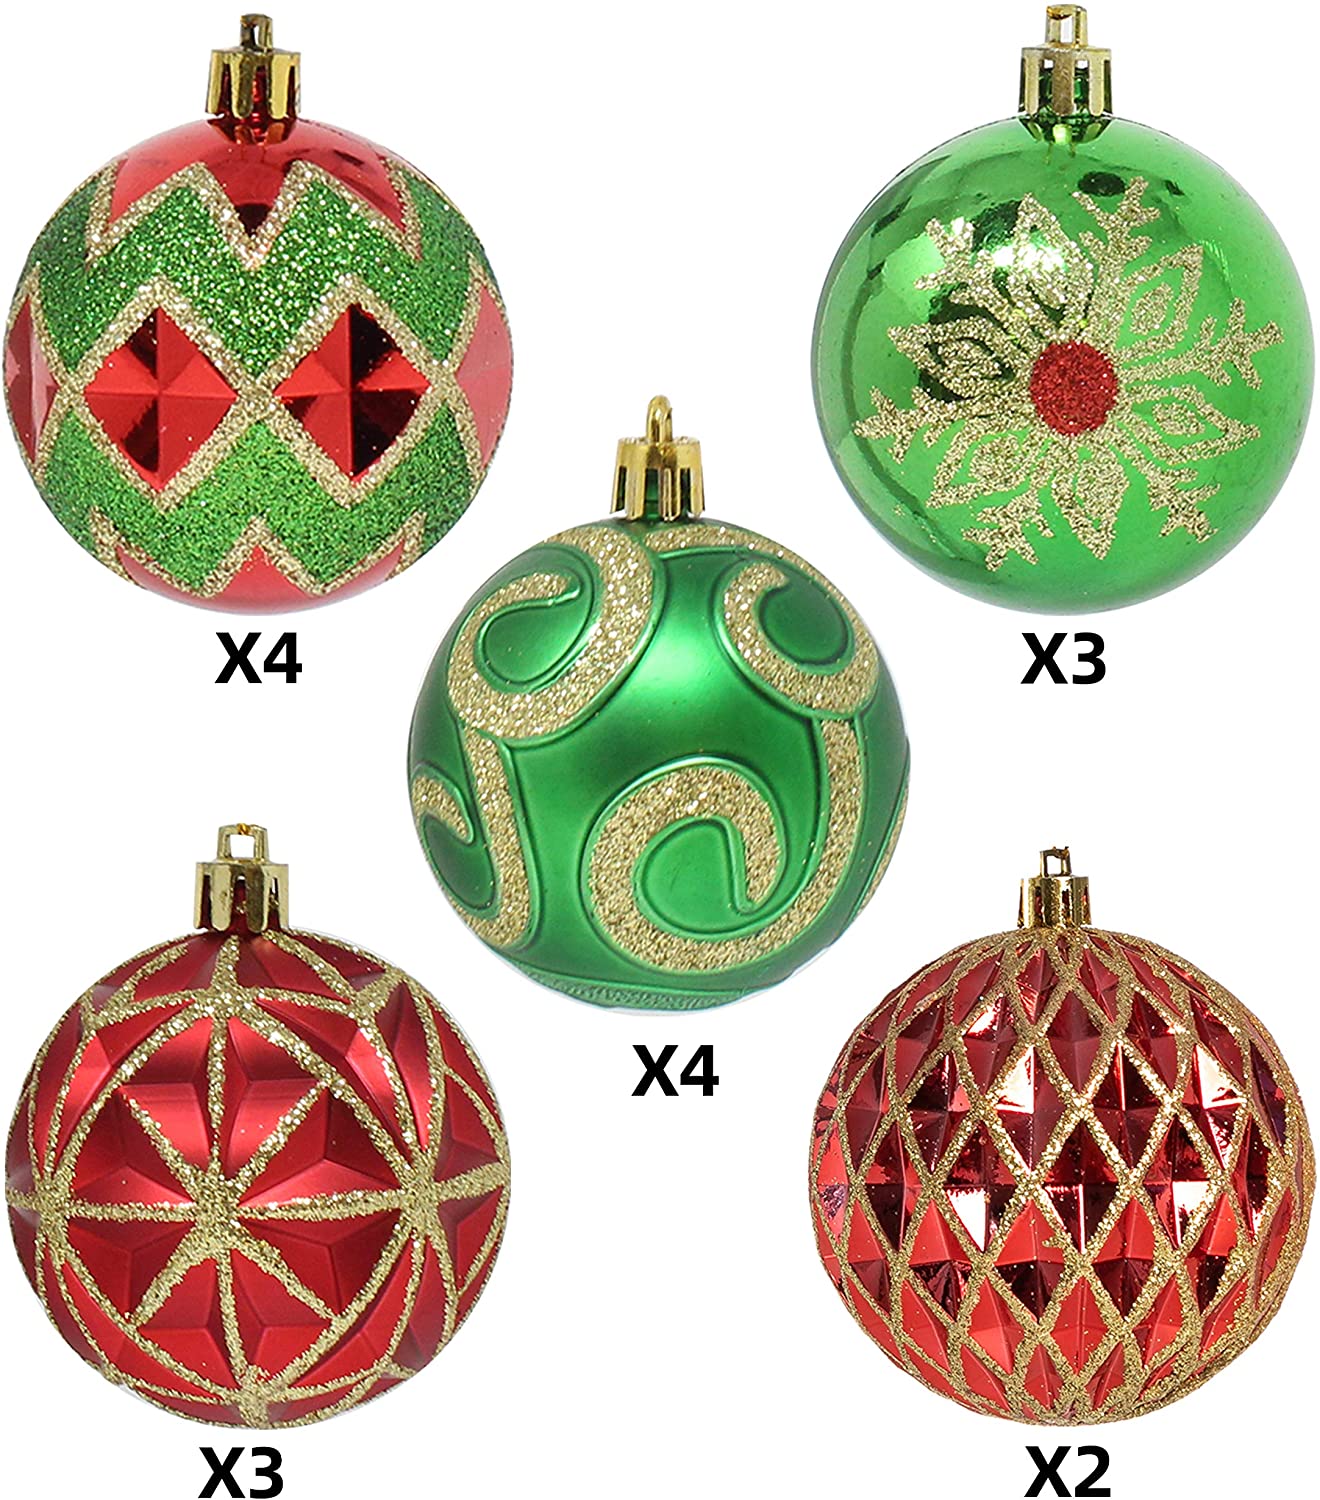 16 Pcs Red, Green and Gold Christmas Ornaments